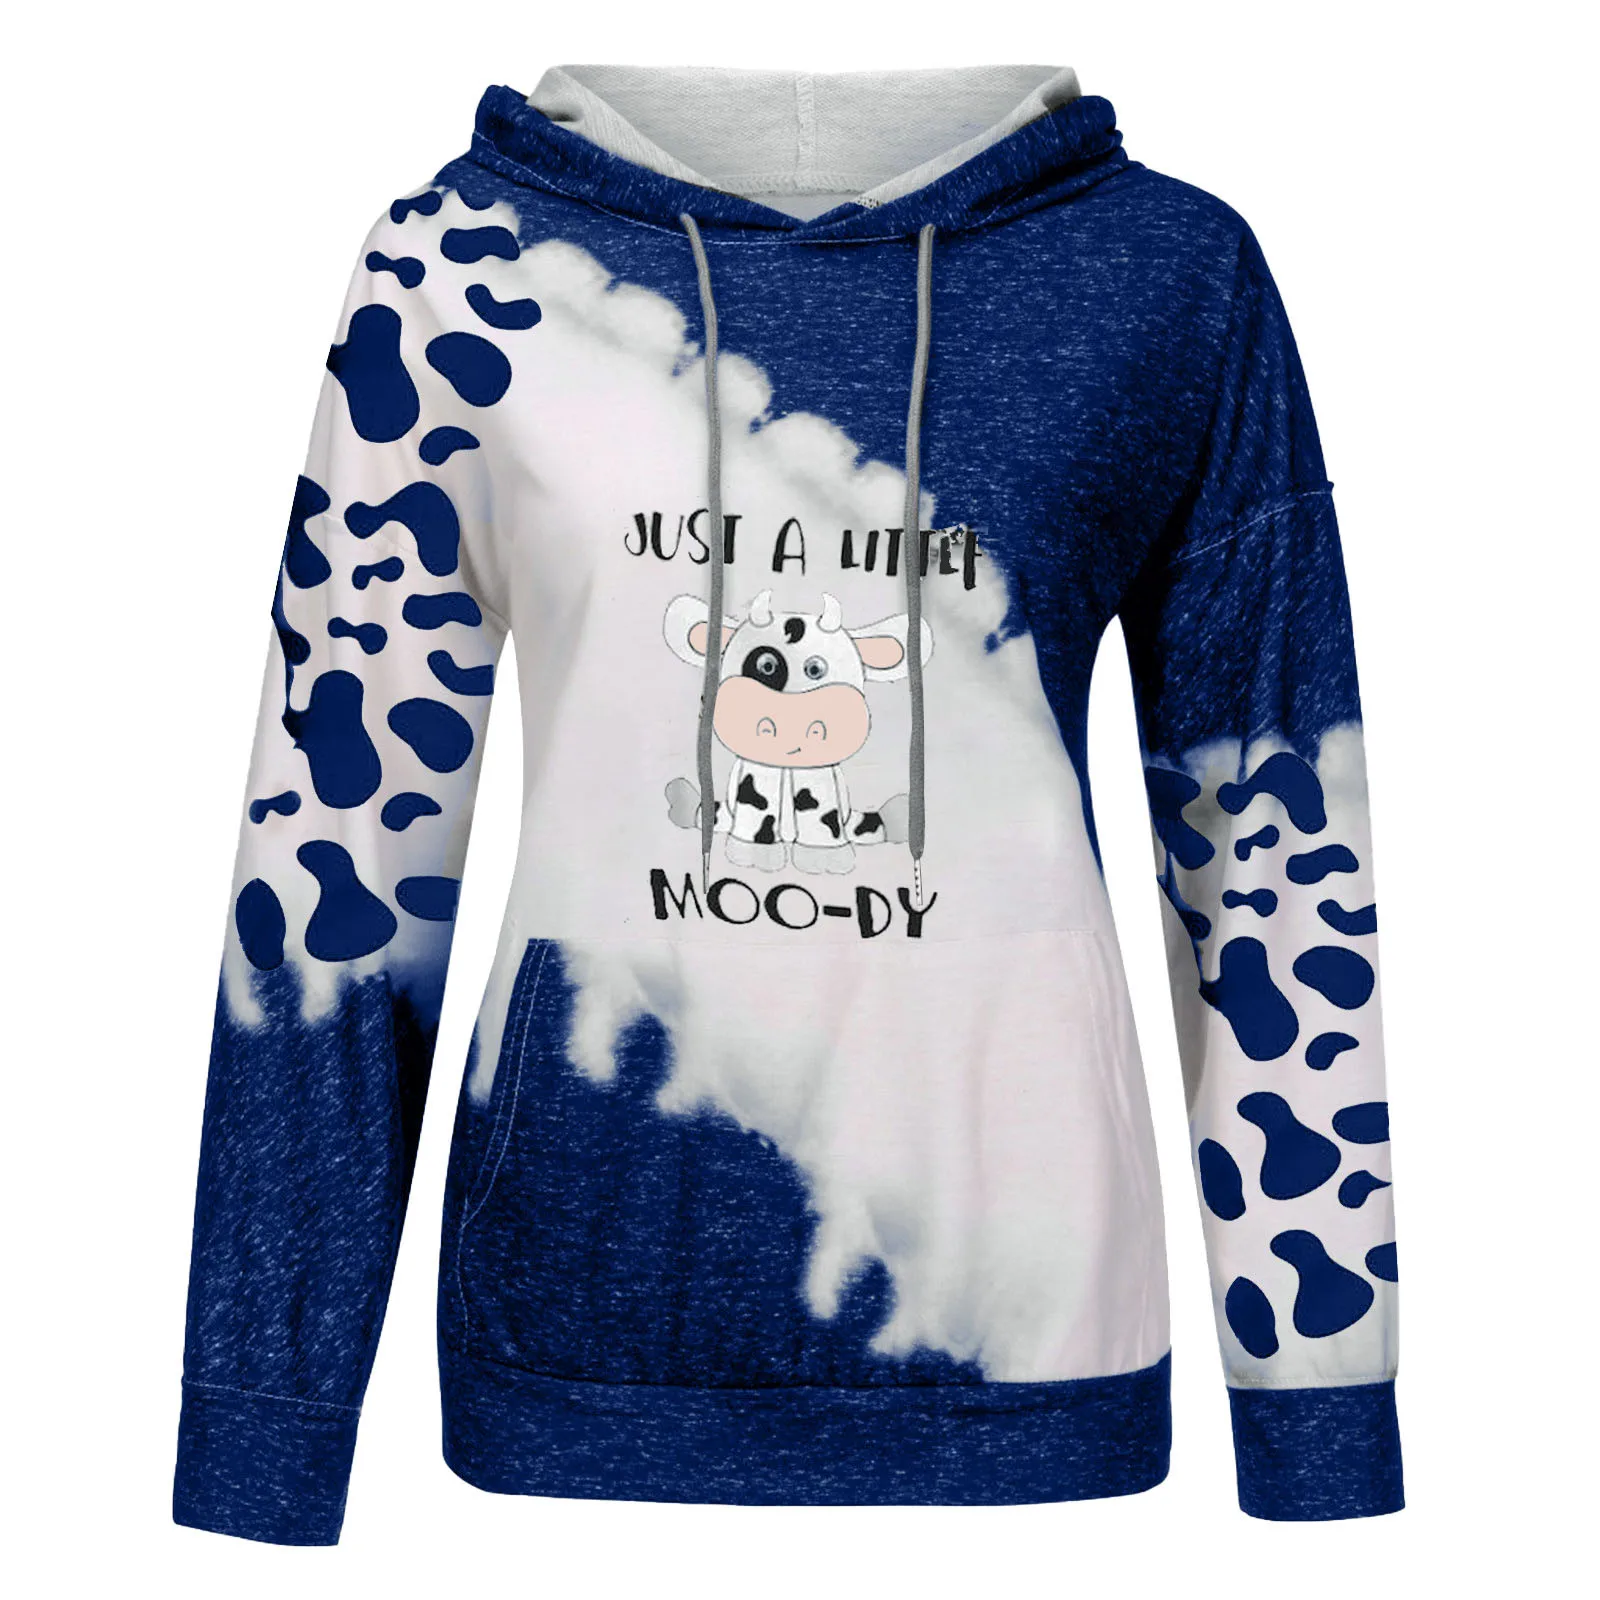 Fall Clothes for Women Cute Cow Print Color Block Long Sleeve Pocket Hoodie Open Front Cardigan Jacket Coat Top Pullover 